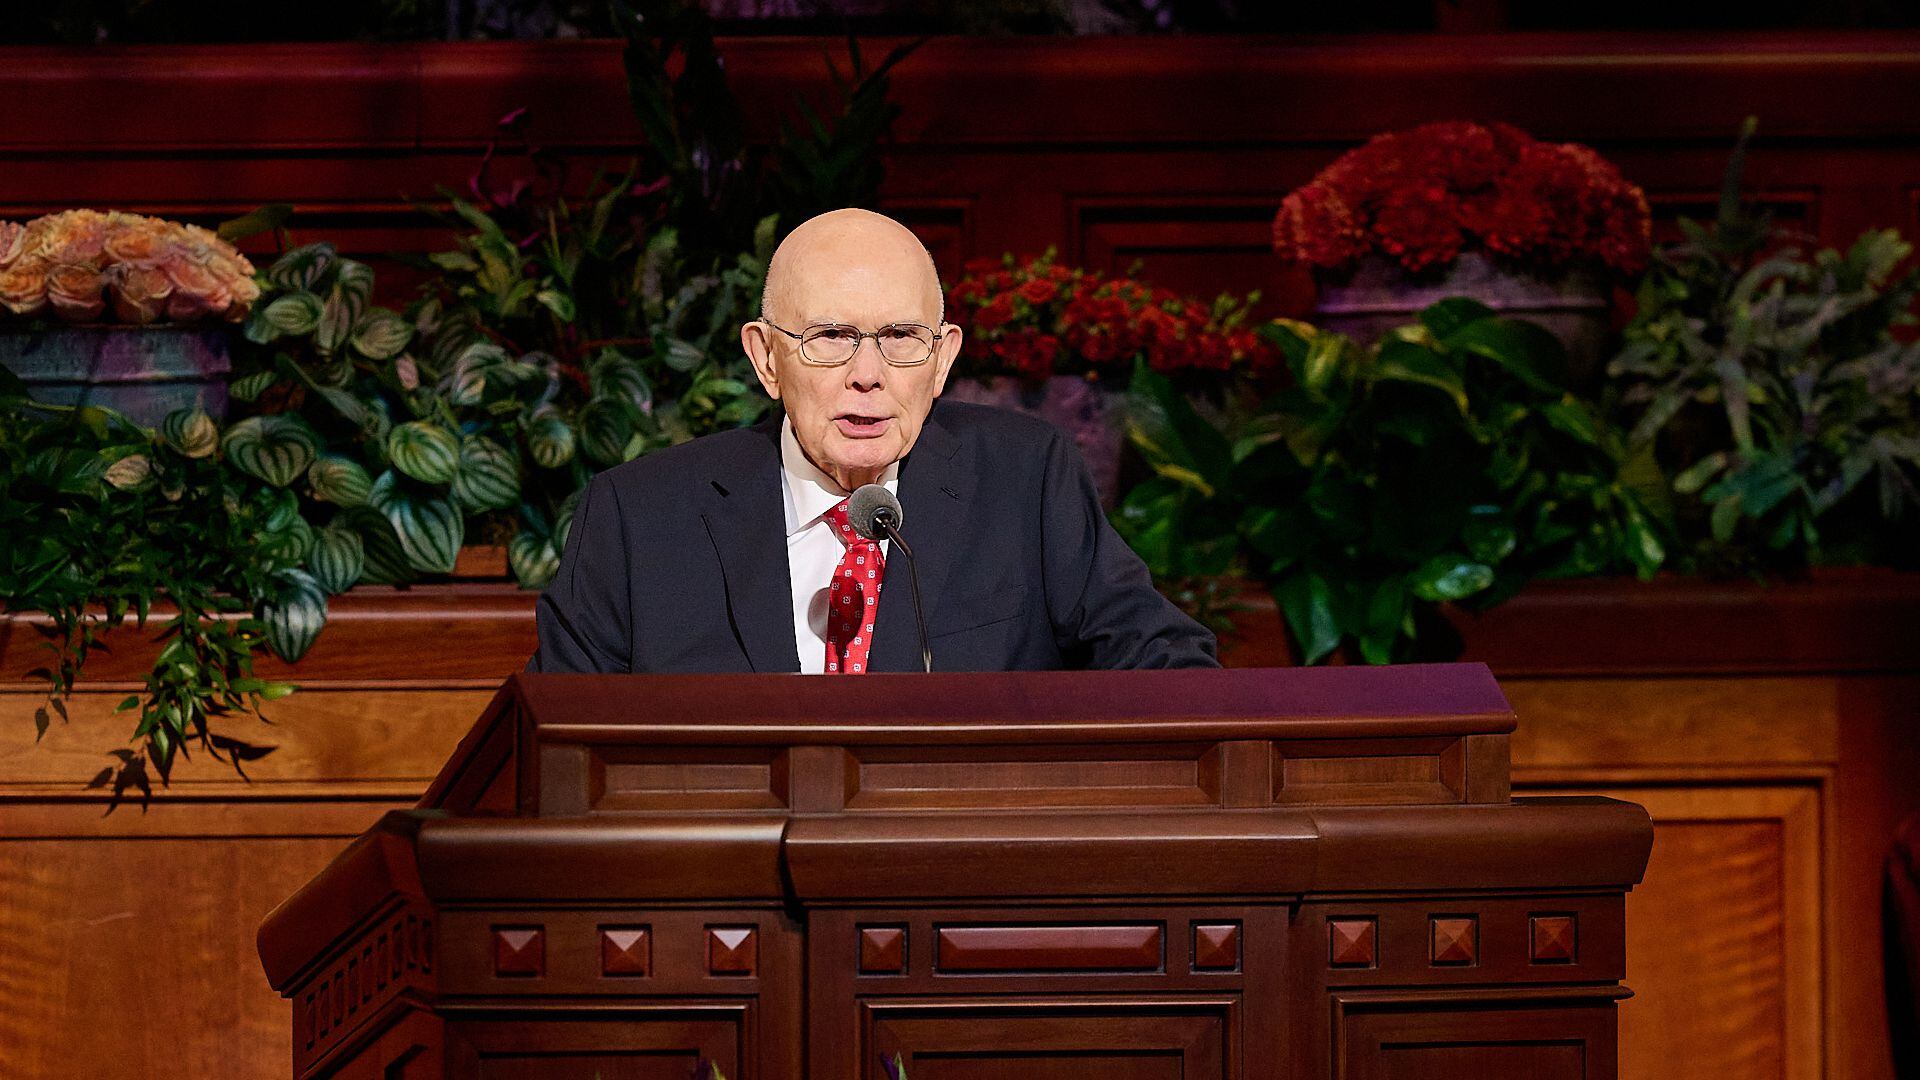 (The Church of Jesus Christ of Latter-day Saints) President Dallin H. Oaks, first counselor in the governing First Presidency, speaks at General Conference in 2023. Oaks graduated from — and later taught at — the University of Chicago Law School.